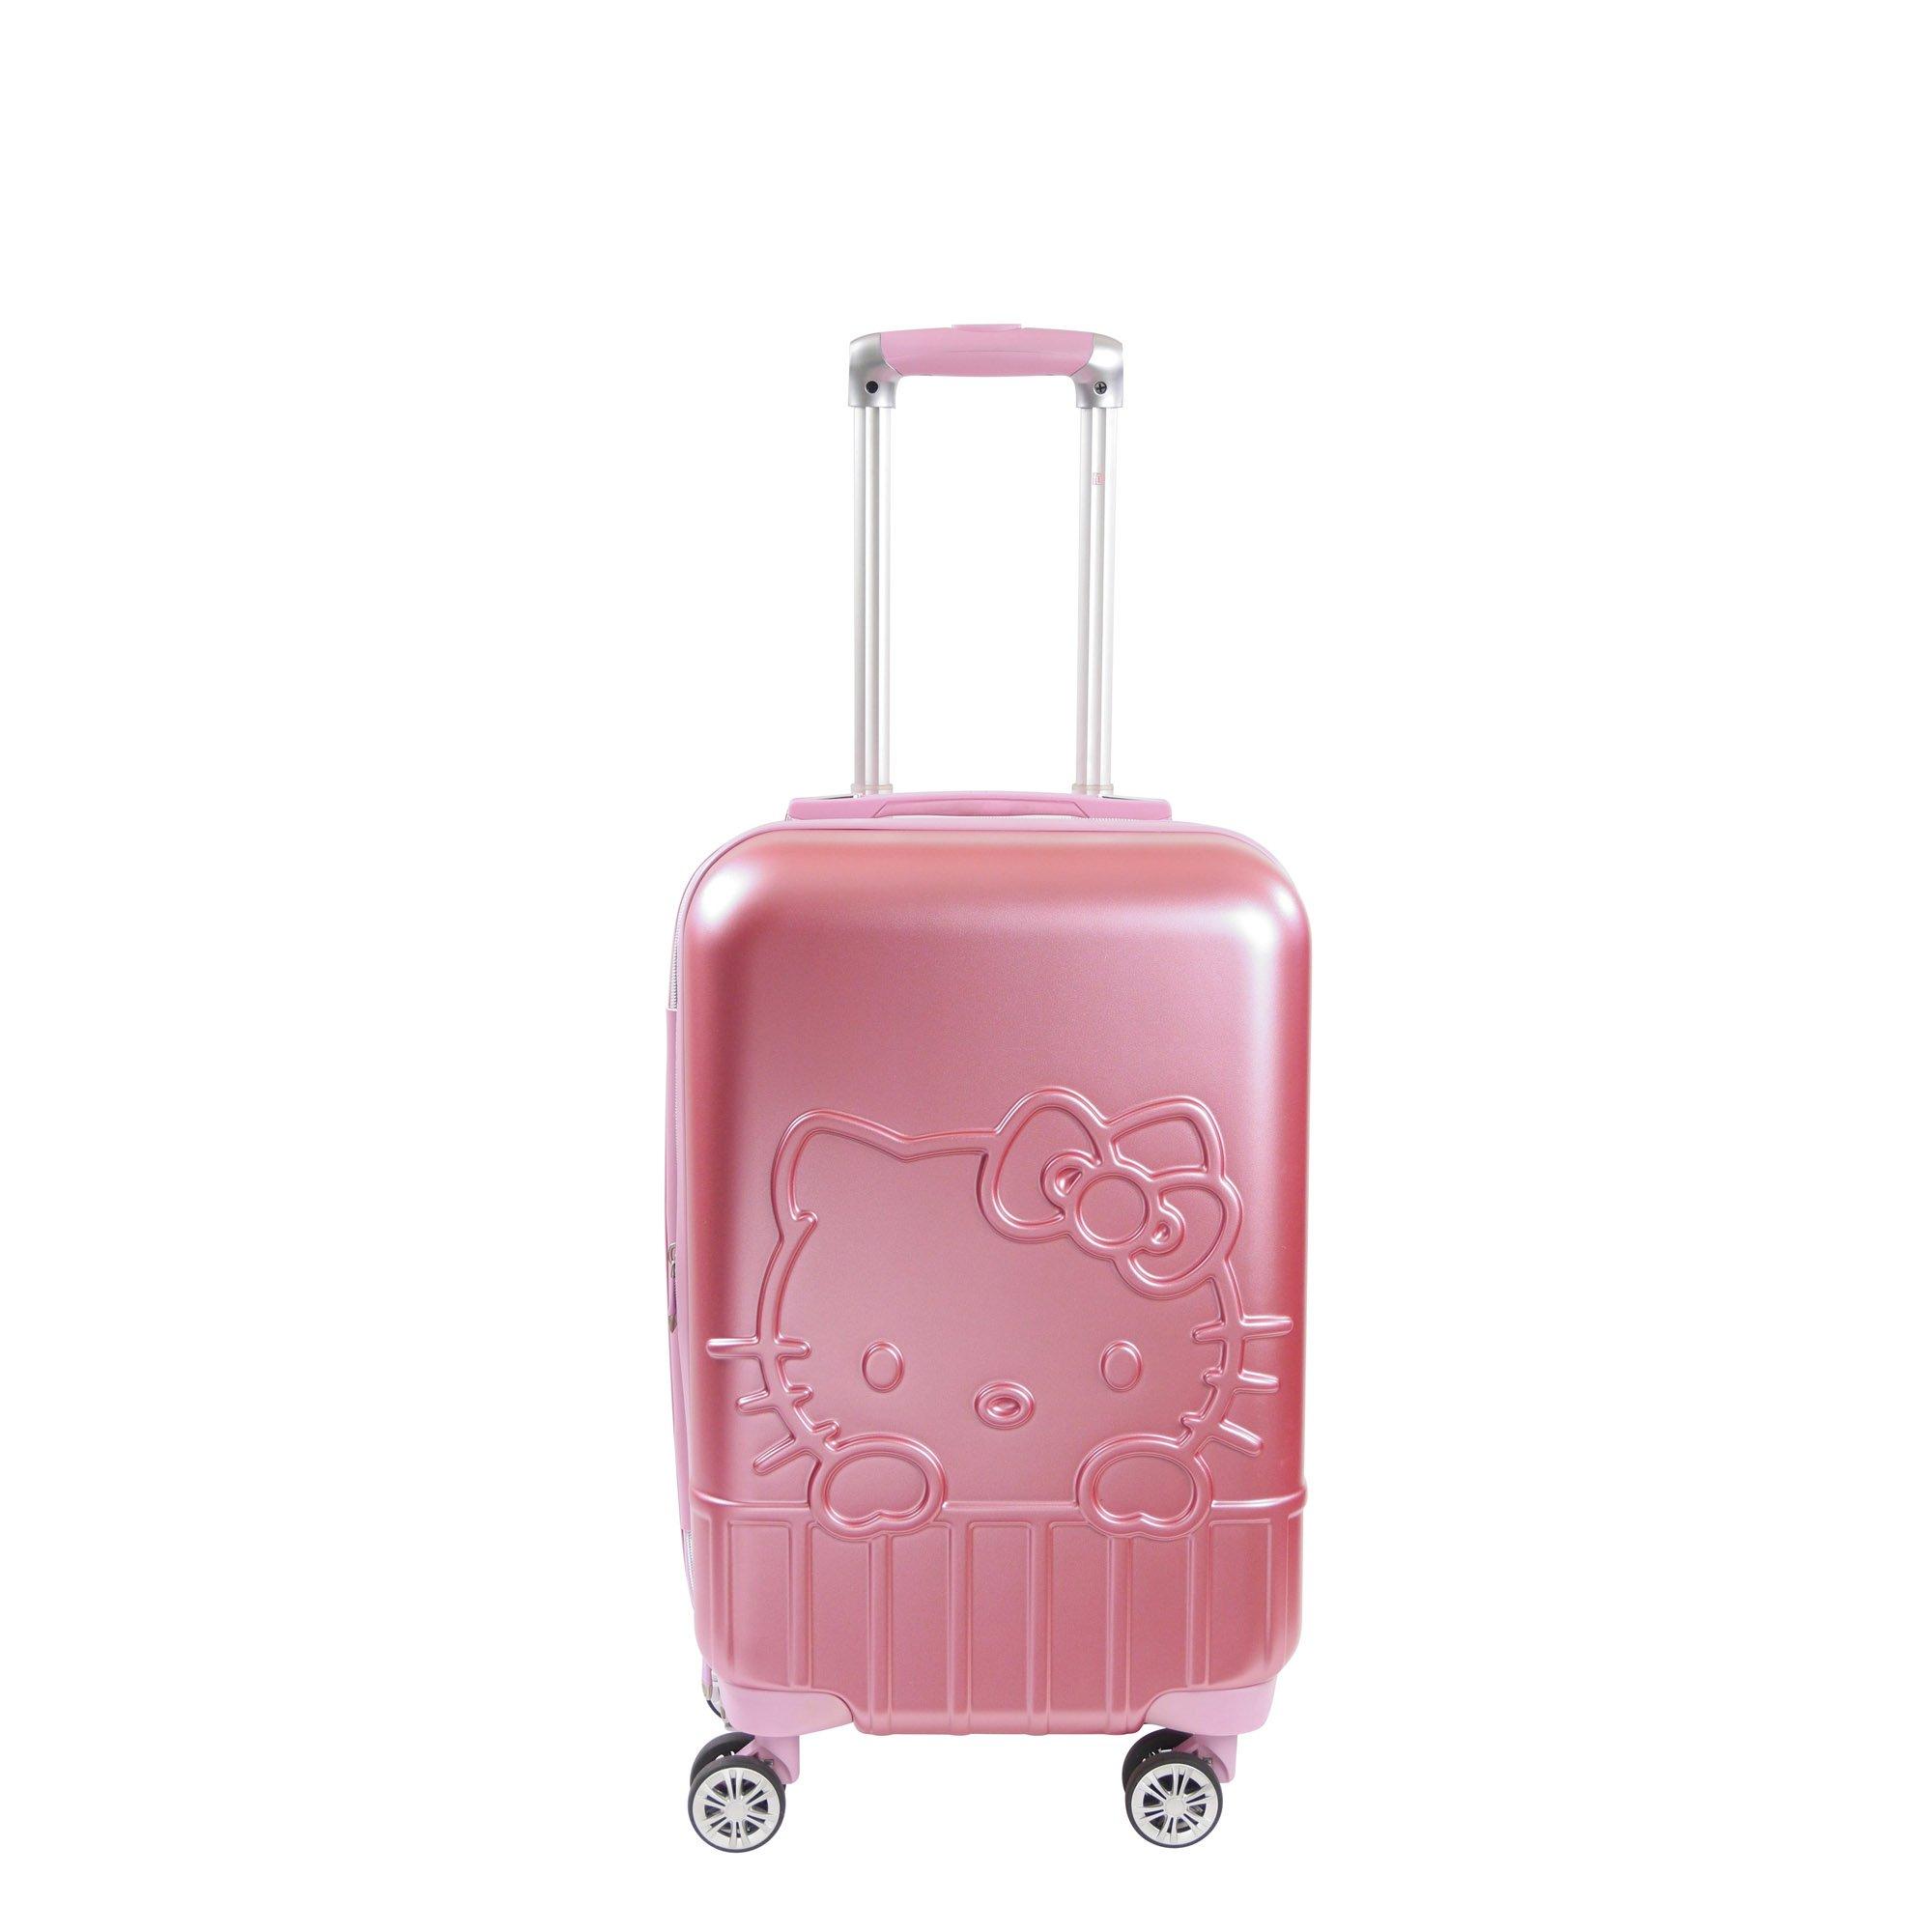 FUL Hello Kitty 21-in Hard-Sided Carry-On Luggage - Pink, Concept One